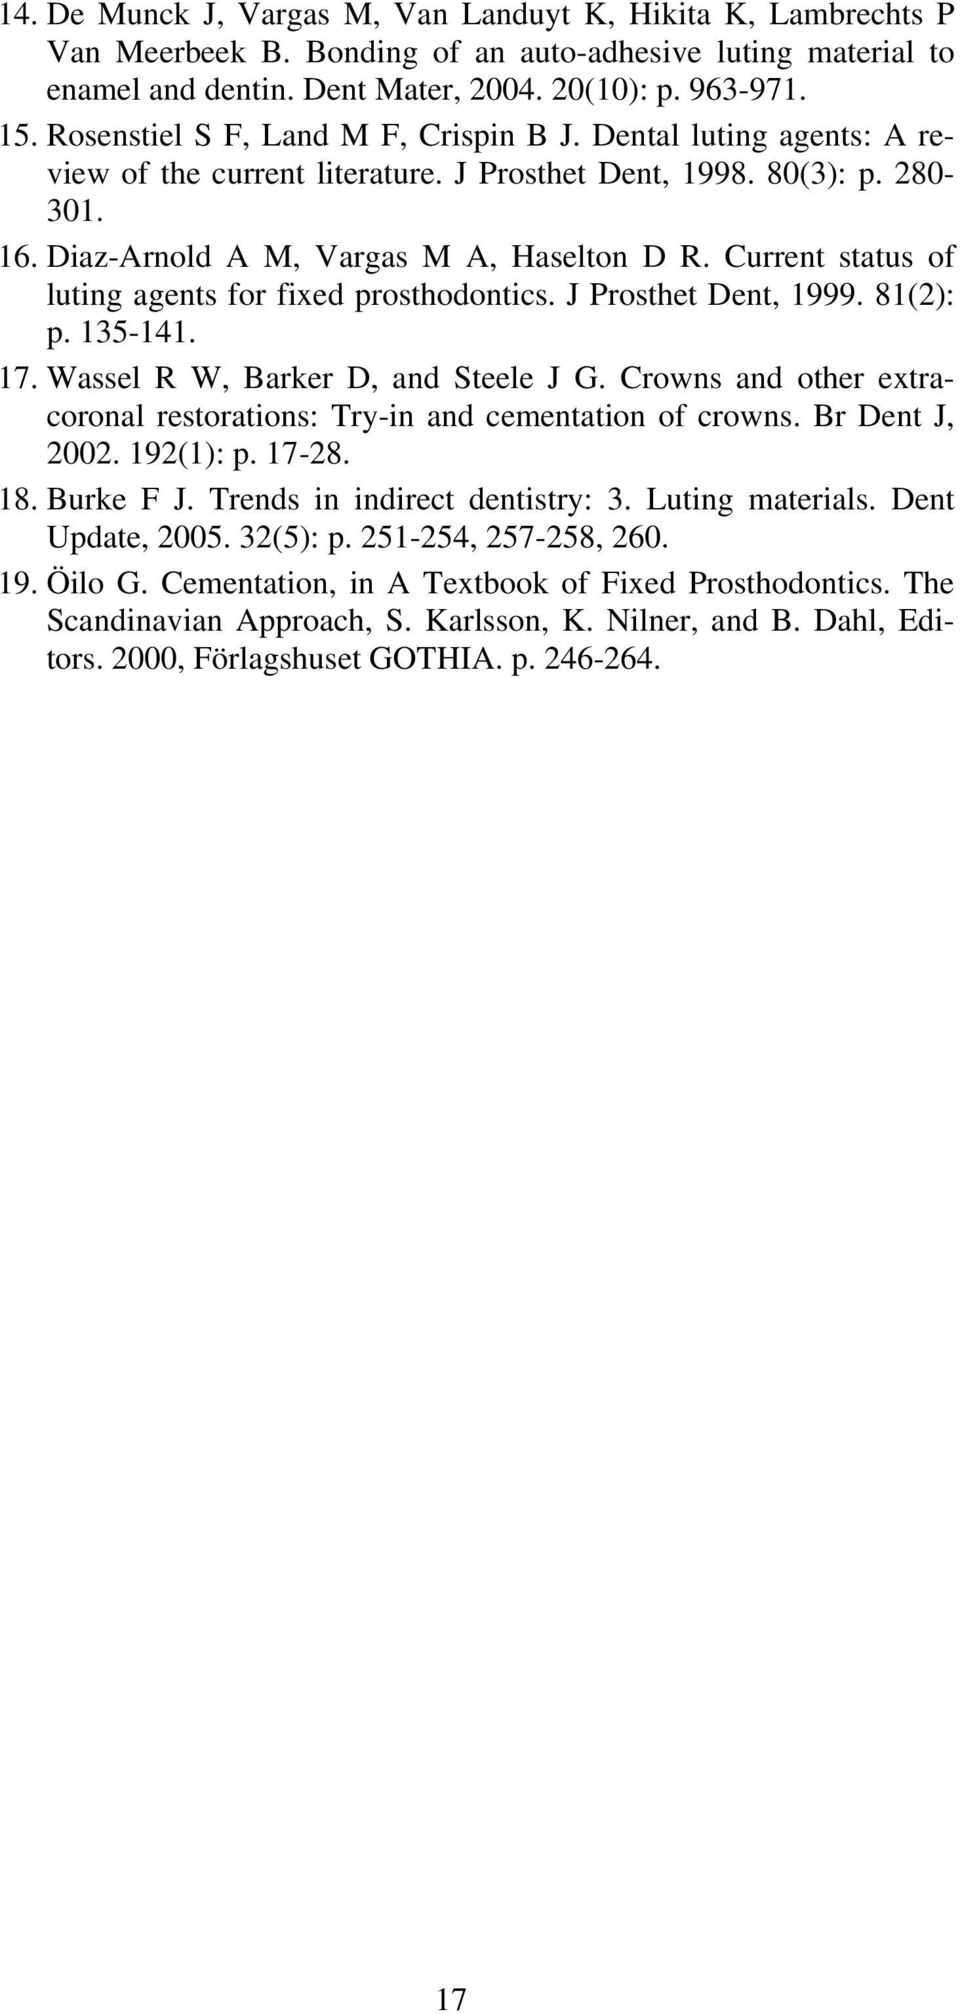 Current status of luting agents for fixed prosthodontics. J Prosthet Dent, 1999. 81(2): p. 135-141. 17. Wassel R W, Barker D, and Steele J G.